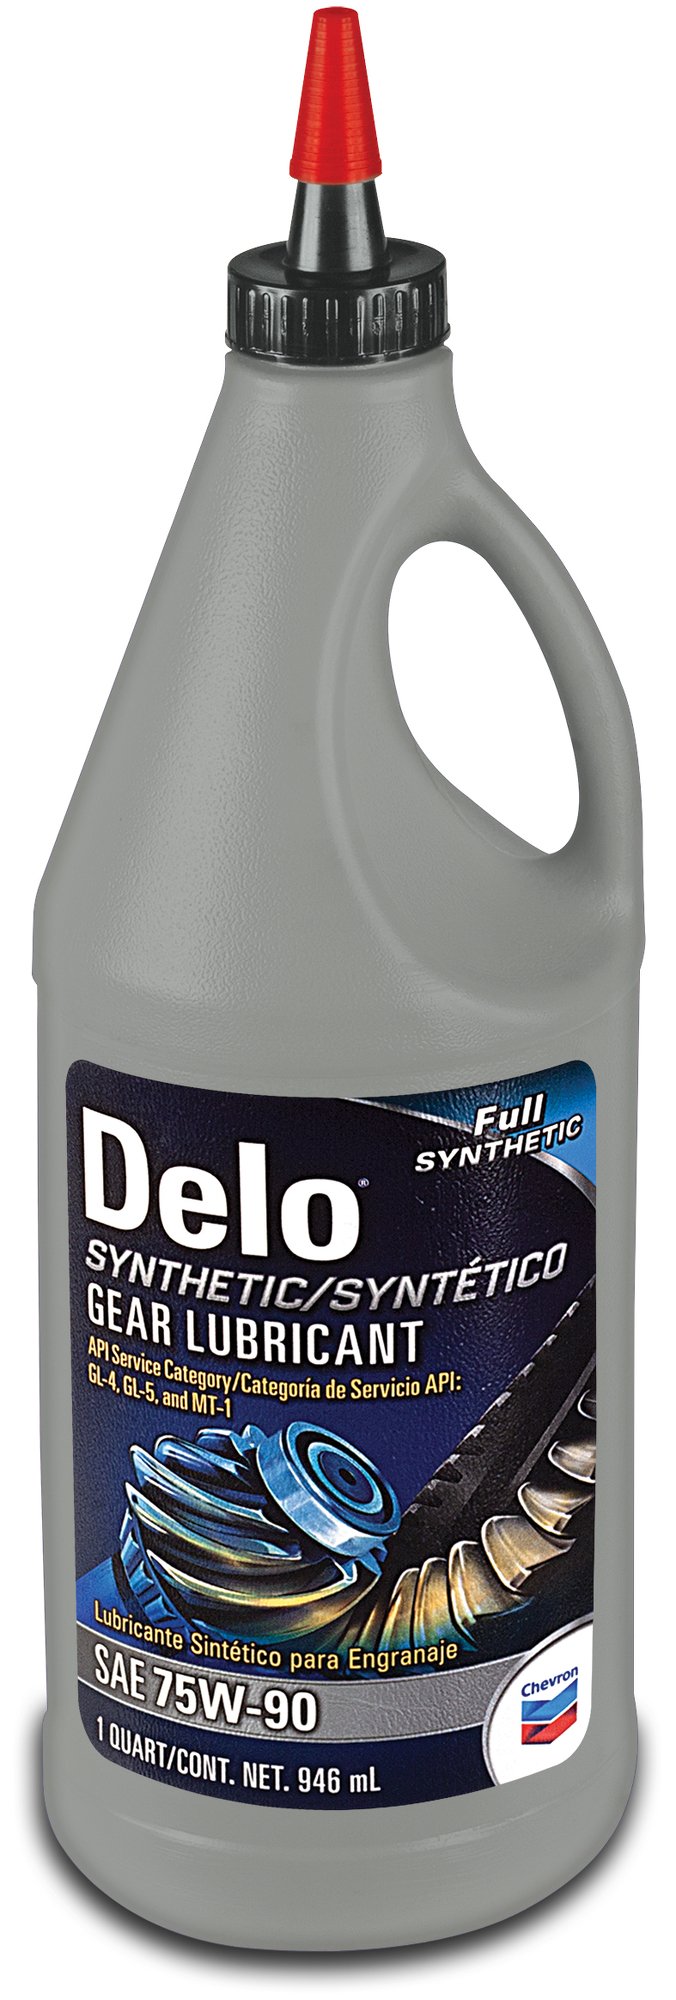 Масло DELO SYNTHETIC GEAR LUBRICANT SAE 75W-90 0.816 кг.